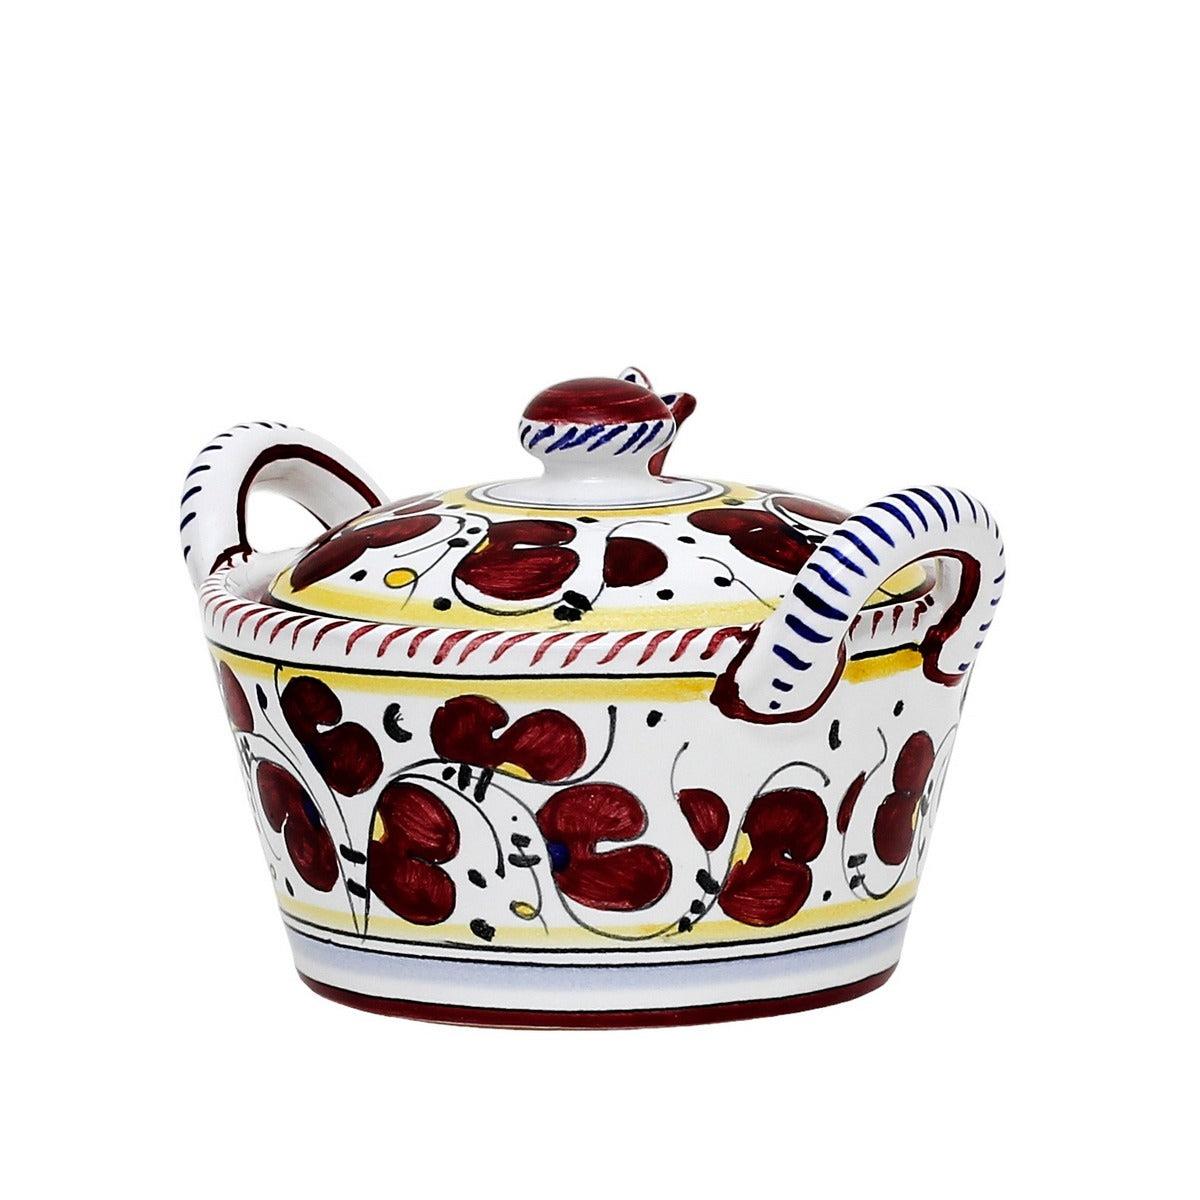 Bowl With Spoon ORVIETO ROOSTER Deruta Majolica Red Ceramic Handmade Dishwasher-Image 4